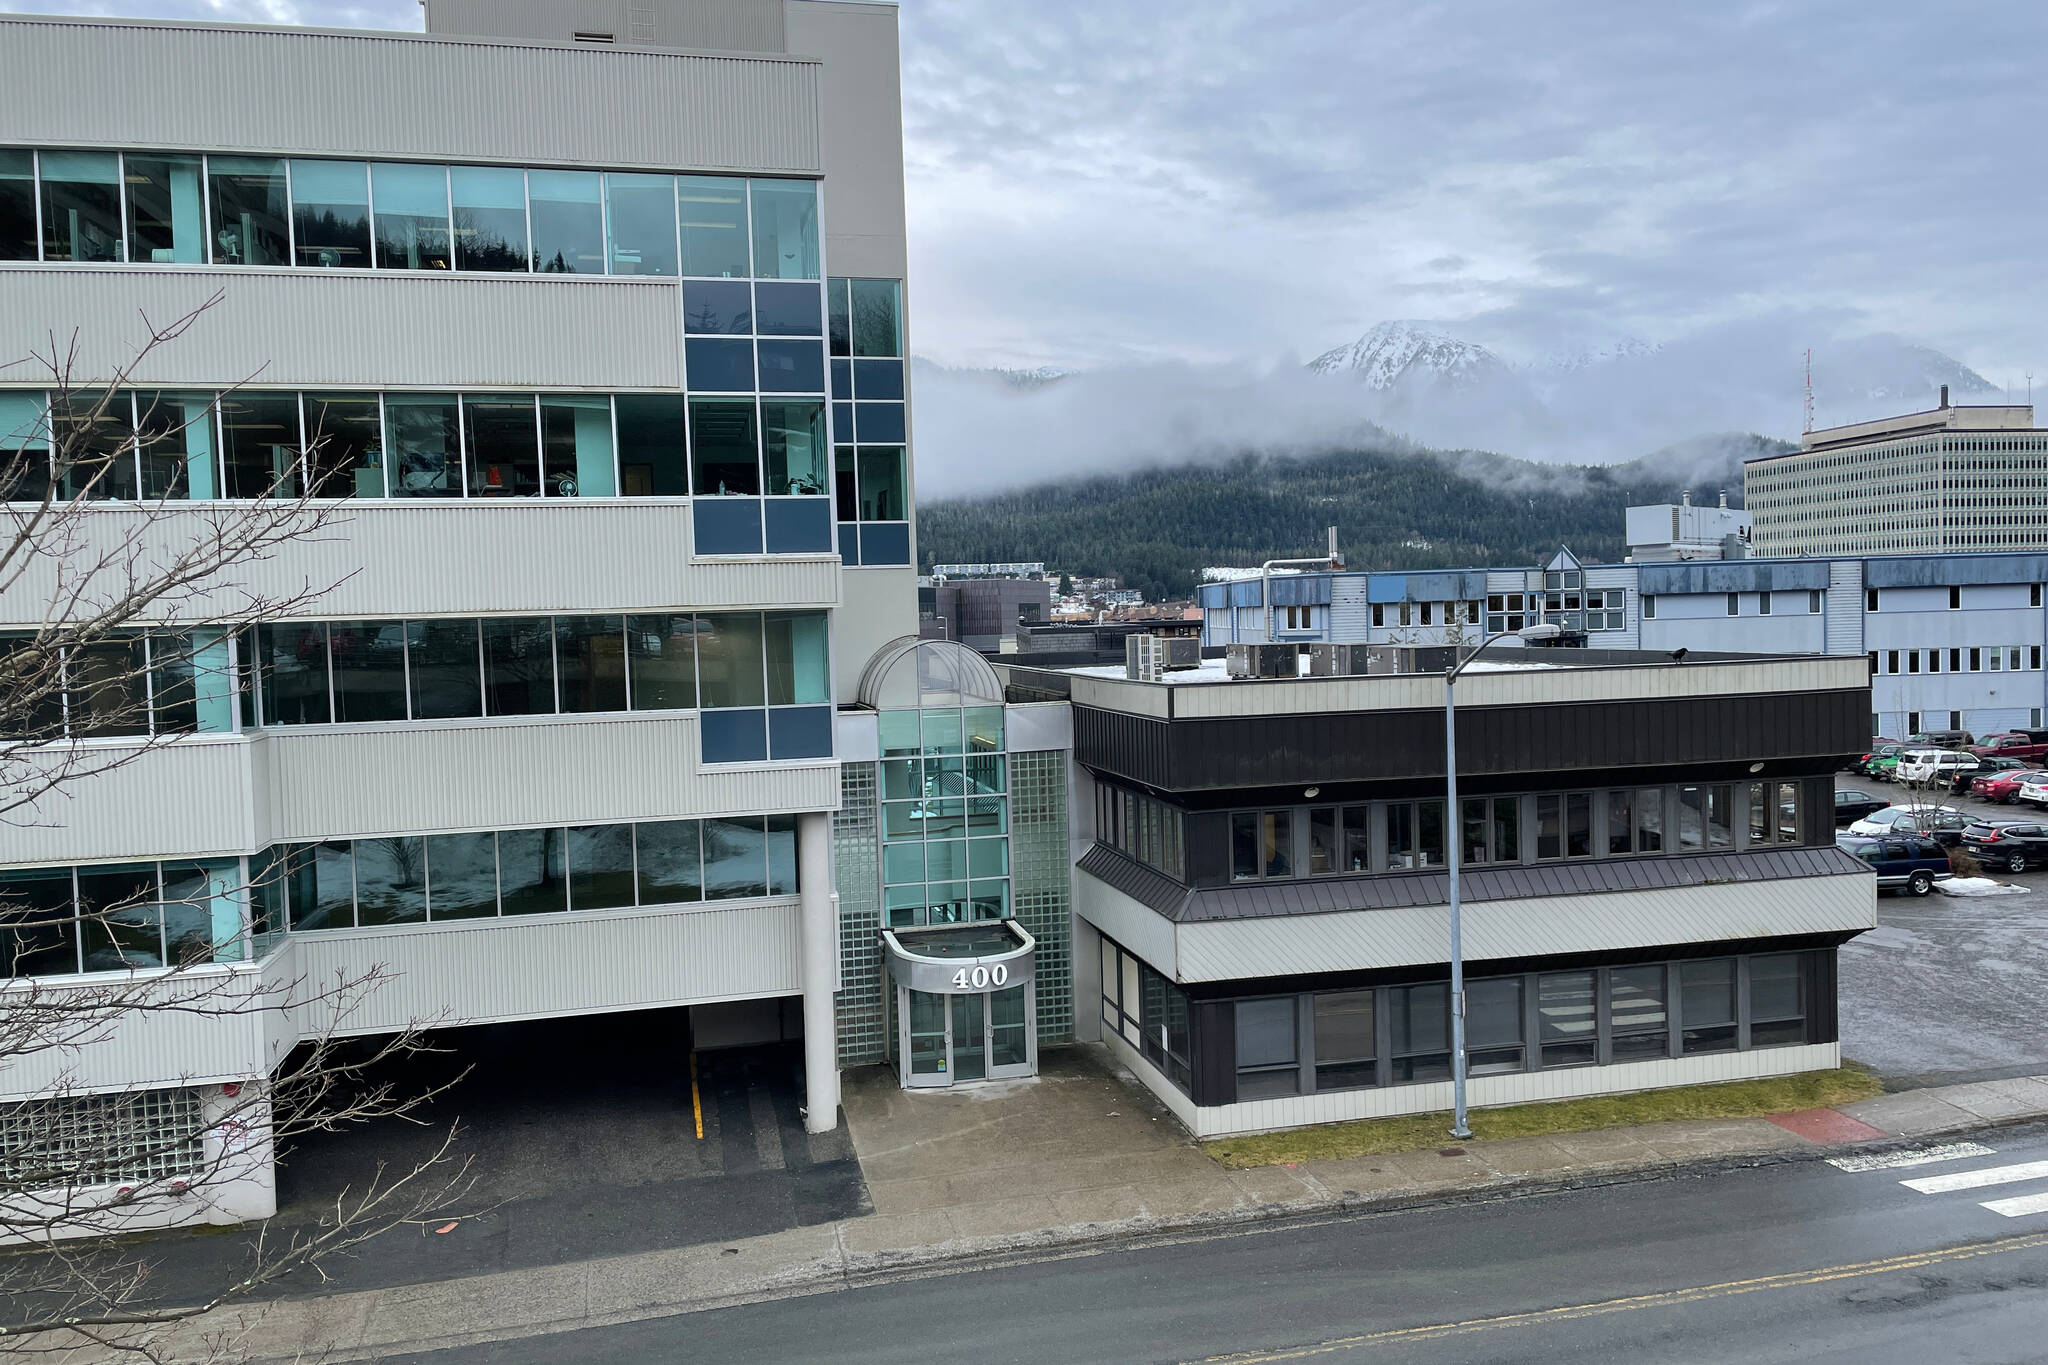 Central Council of Tlingit and Haida Indian Tribes of Alaska recently acquired a pair of buildings downtown near the Andrew Hope Building as it hopes to provide more office space to centralize services for its citizens. (Michael S. Lockett / Juneau Empire)